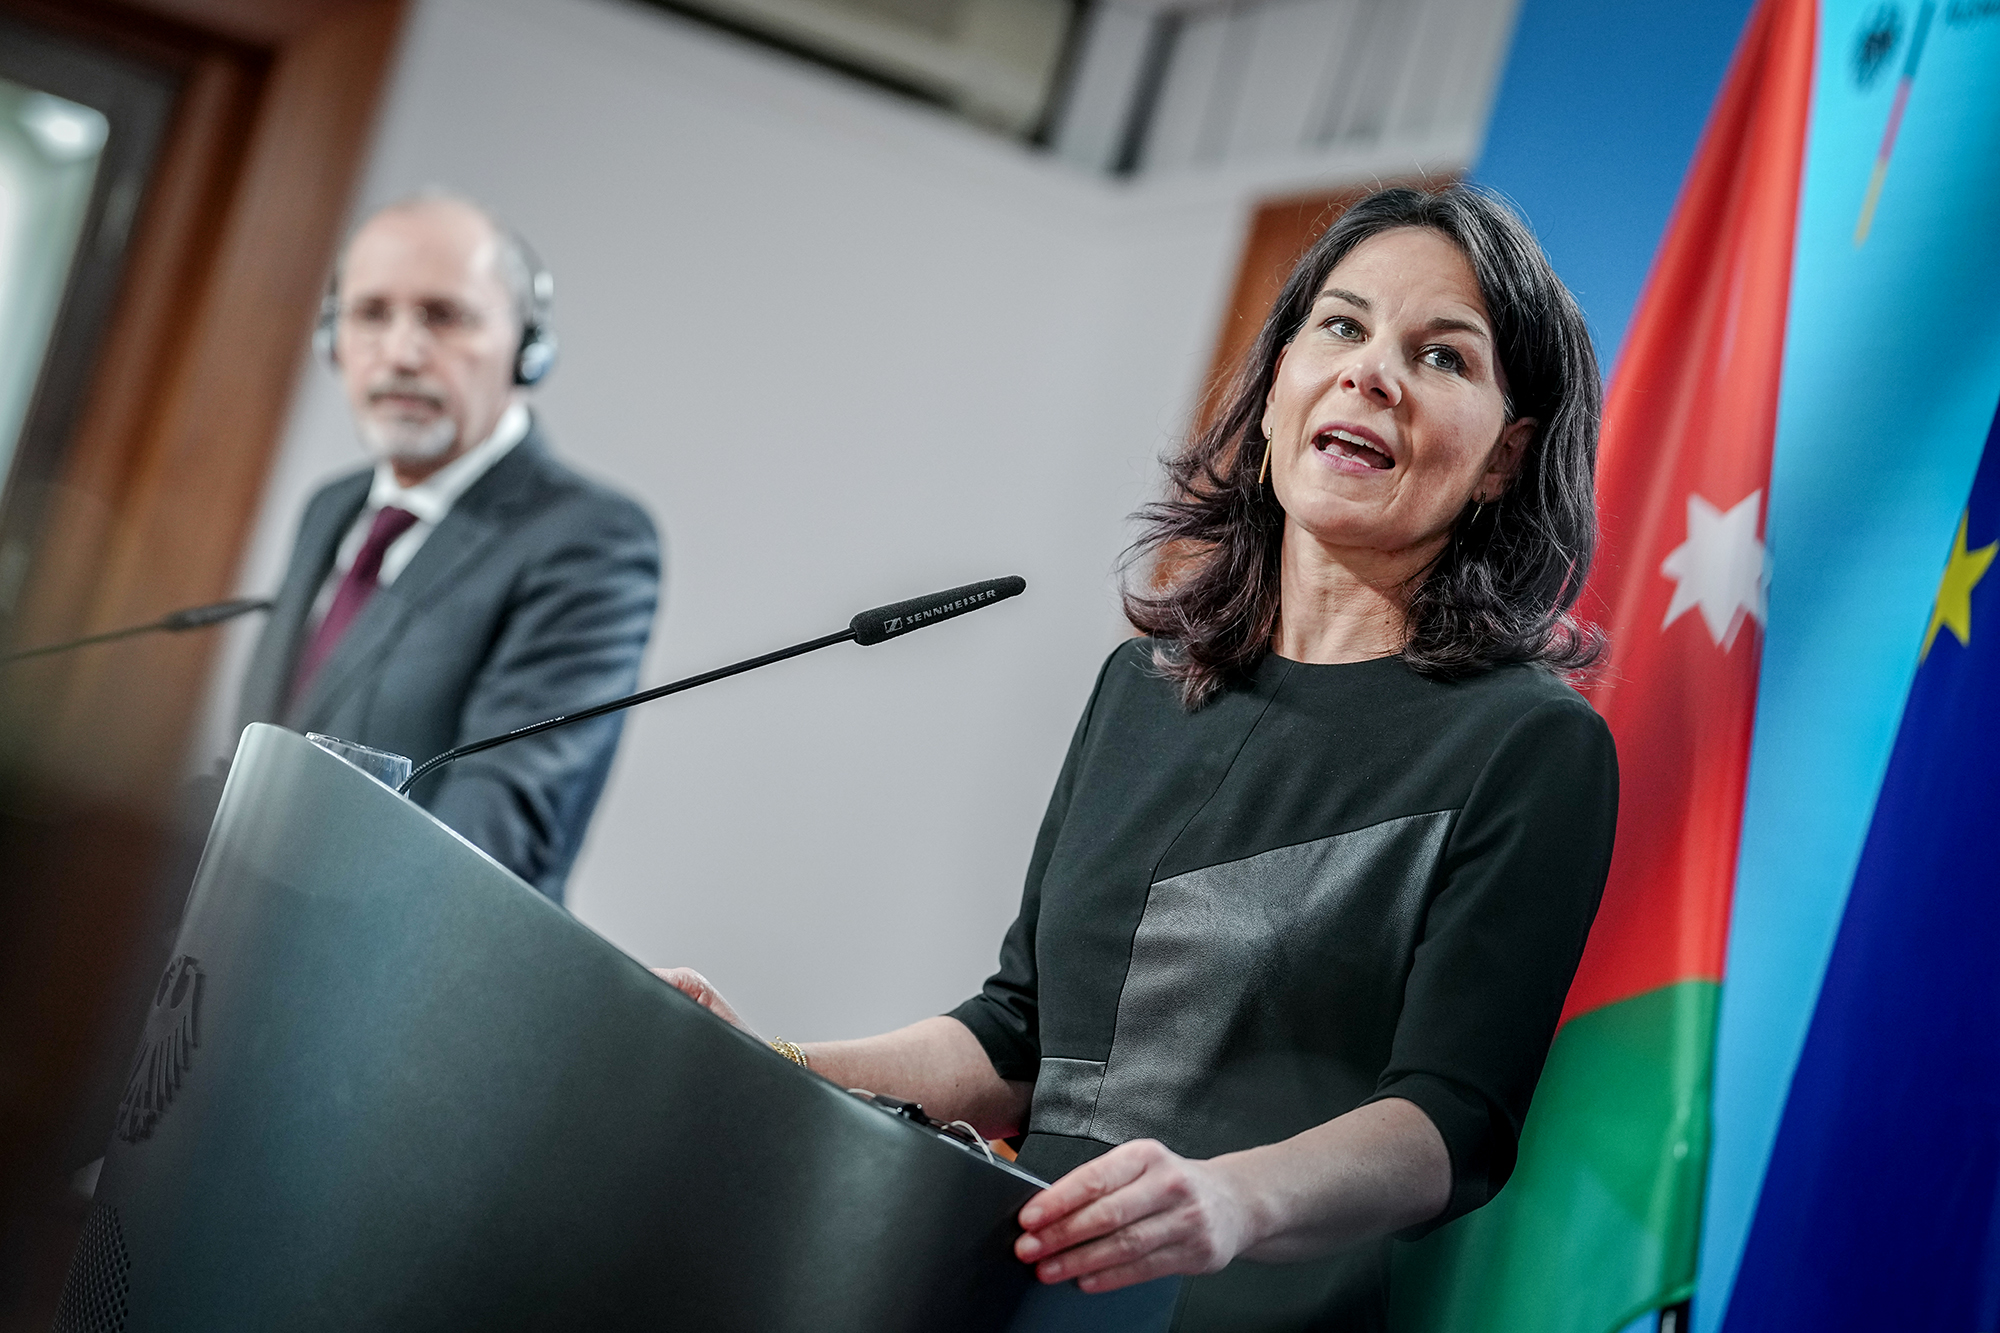 German Foreign Minister Annalena Baerbock and the Foreign Minister of Jordan, Ayman Safadi, give a press conference at the Federal Foreign Office in Berlin, Germany, on April 16.